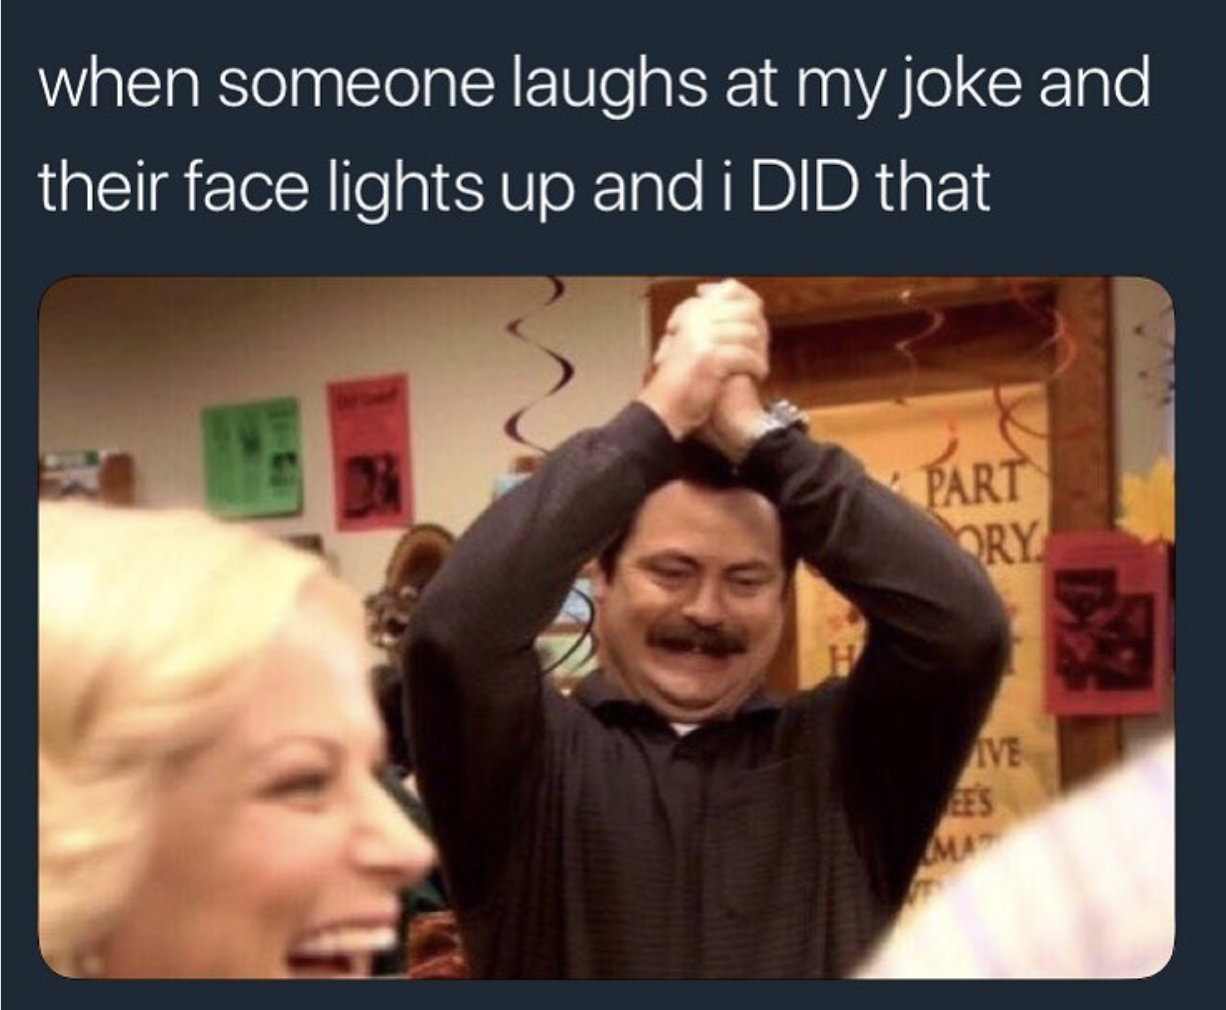 youre a funny person - when someone laughs at my joke and their face lights up and i Did that Part Ory